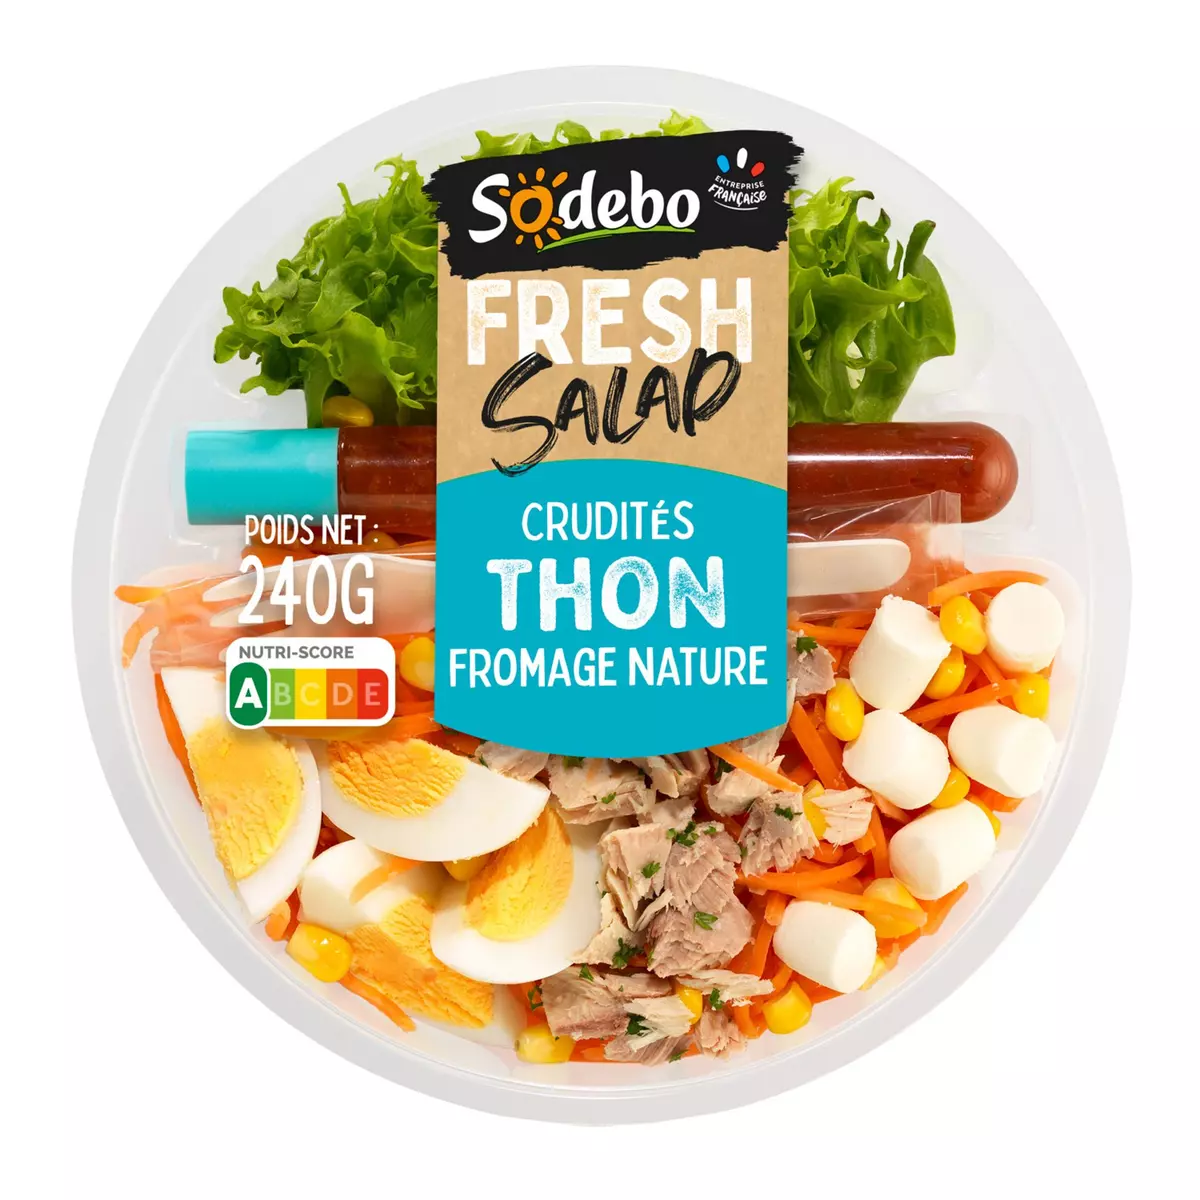 SODEBO Fresh salade thon crudités fromage 1 portion 240g